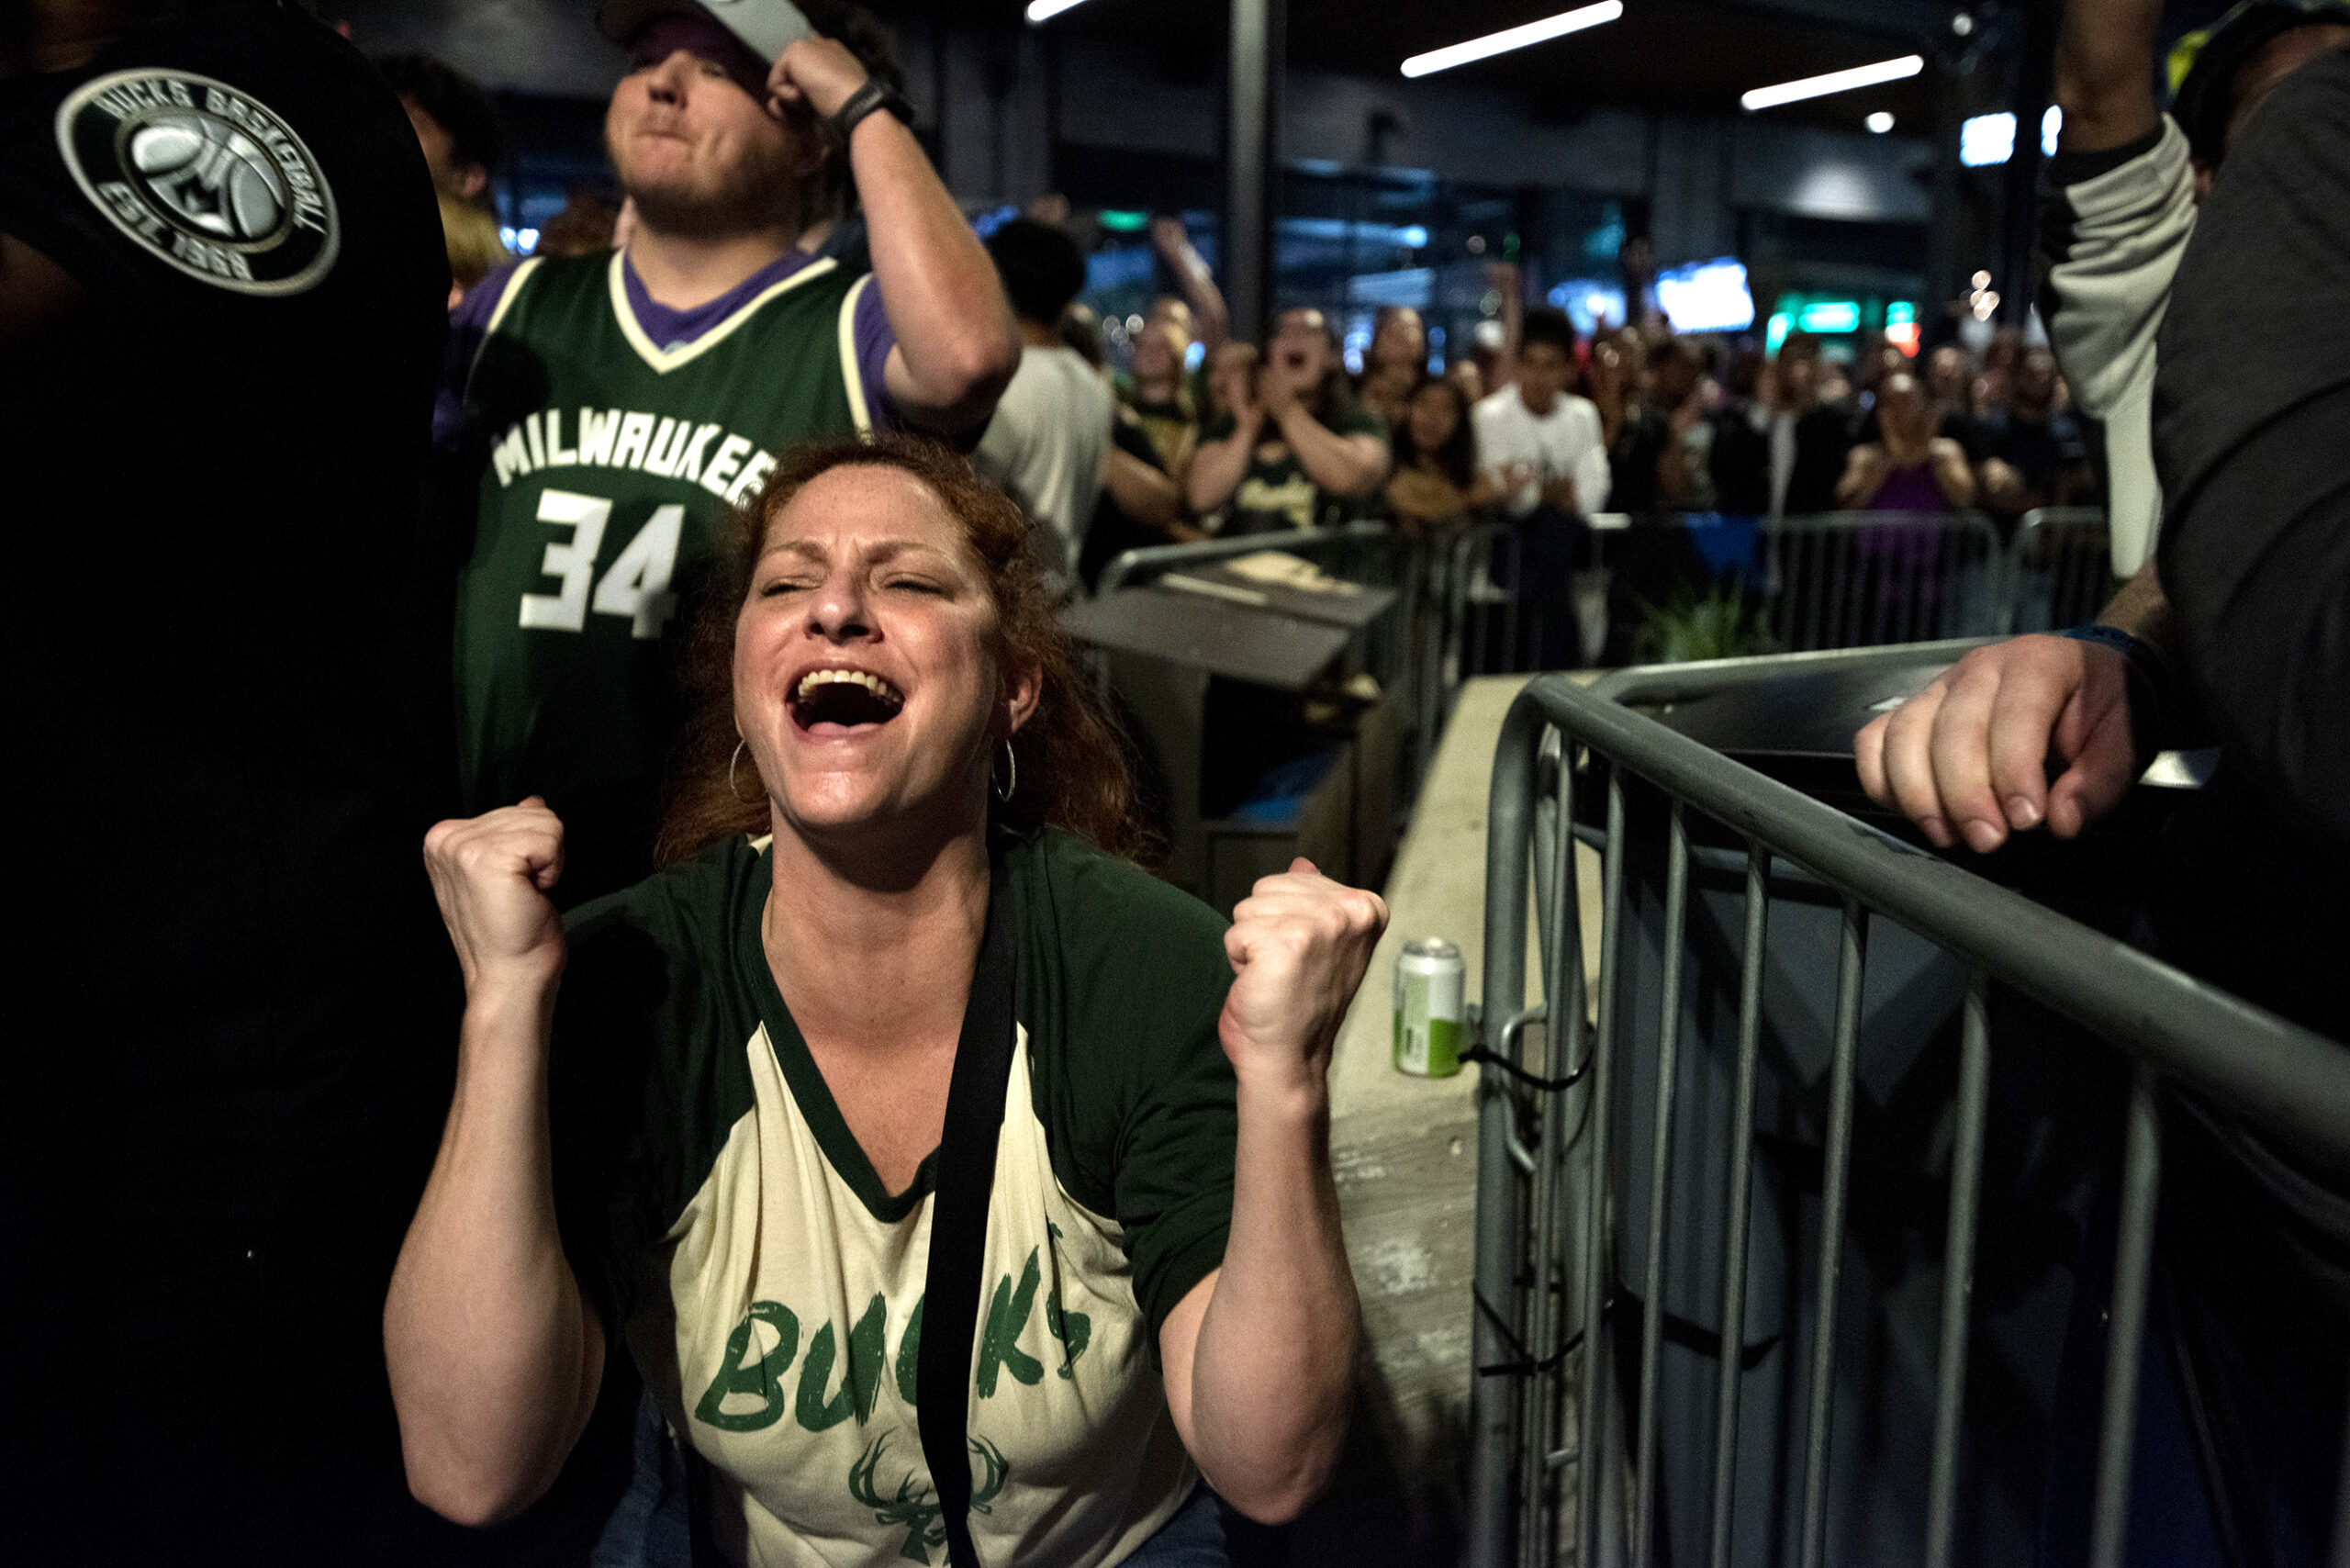 A fan makes fists as she expresses relief at the end of the Bucks game.